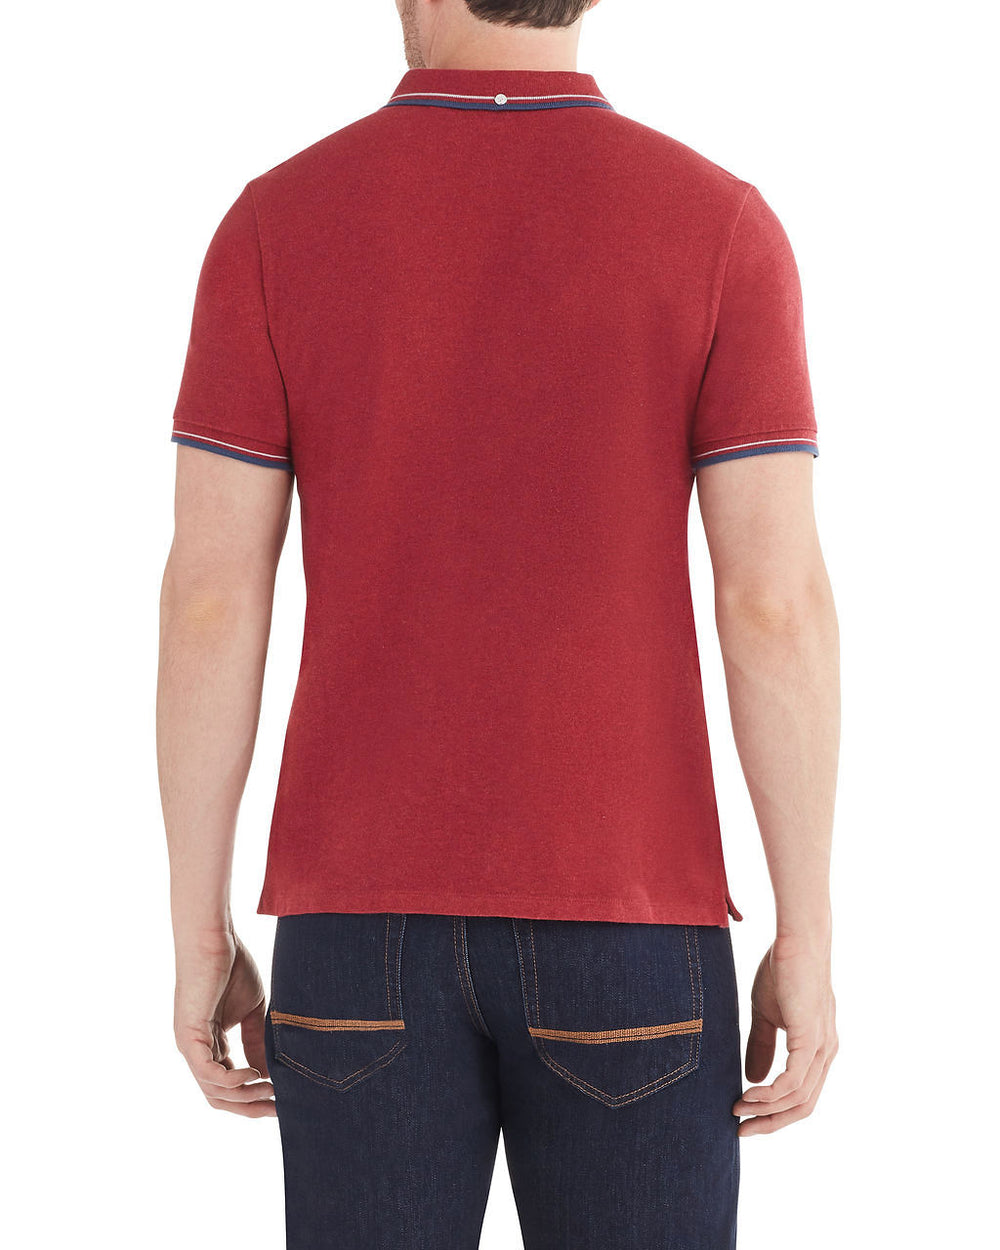 Romford Polo Shirt - Red